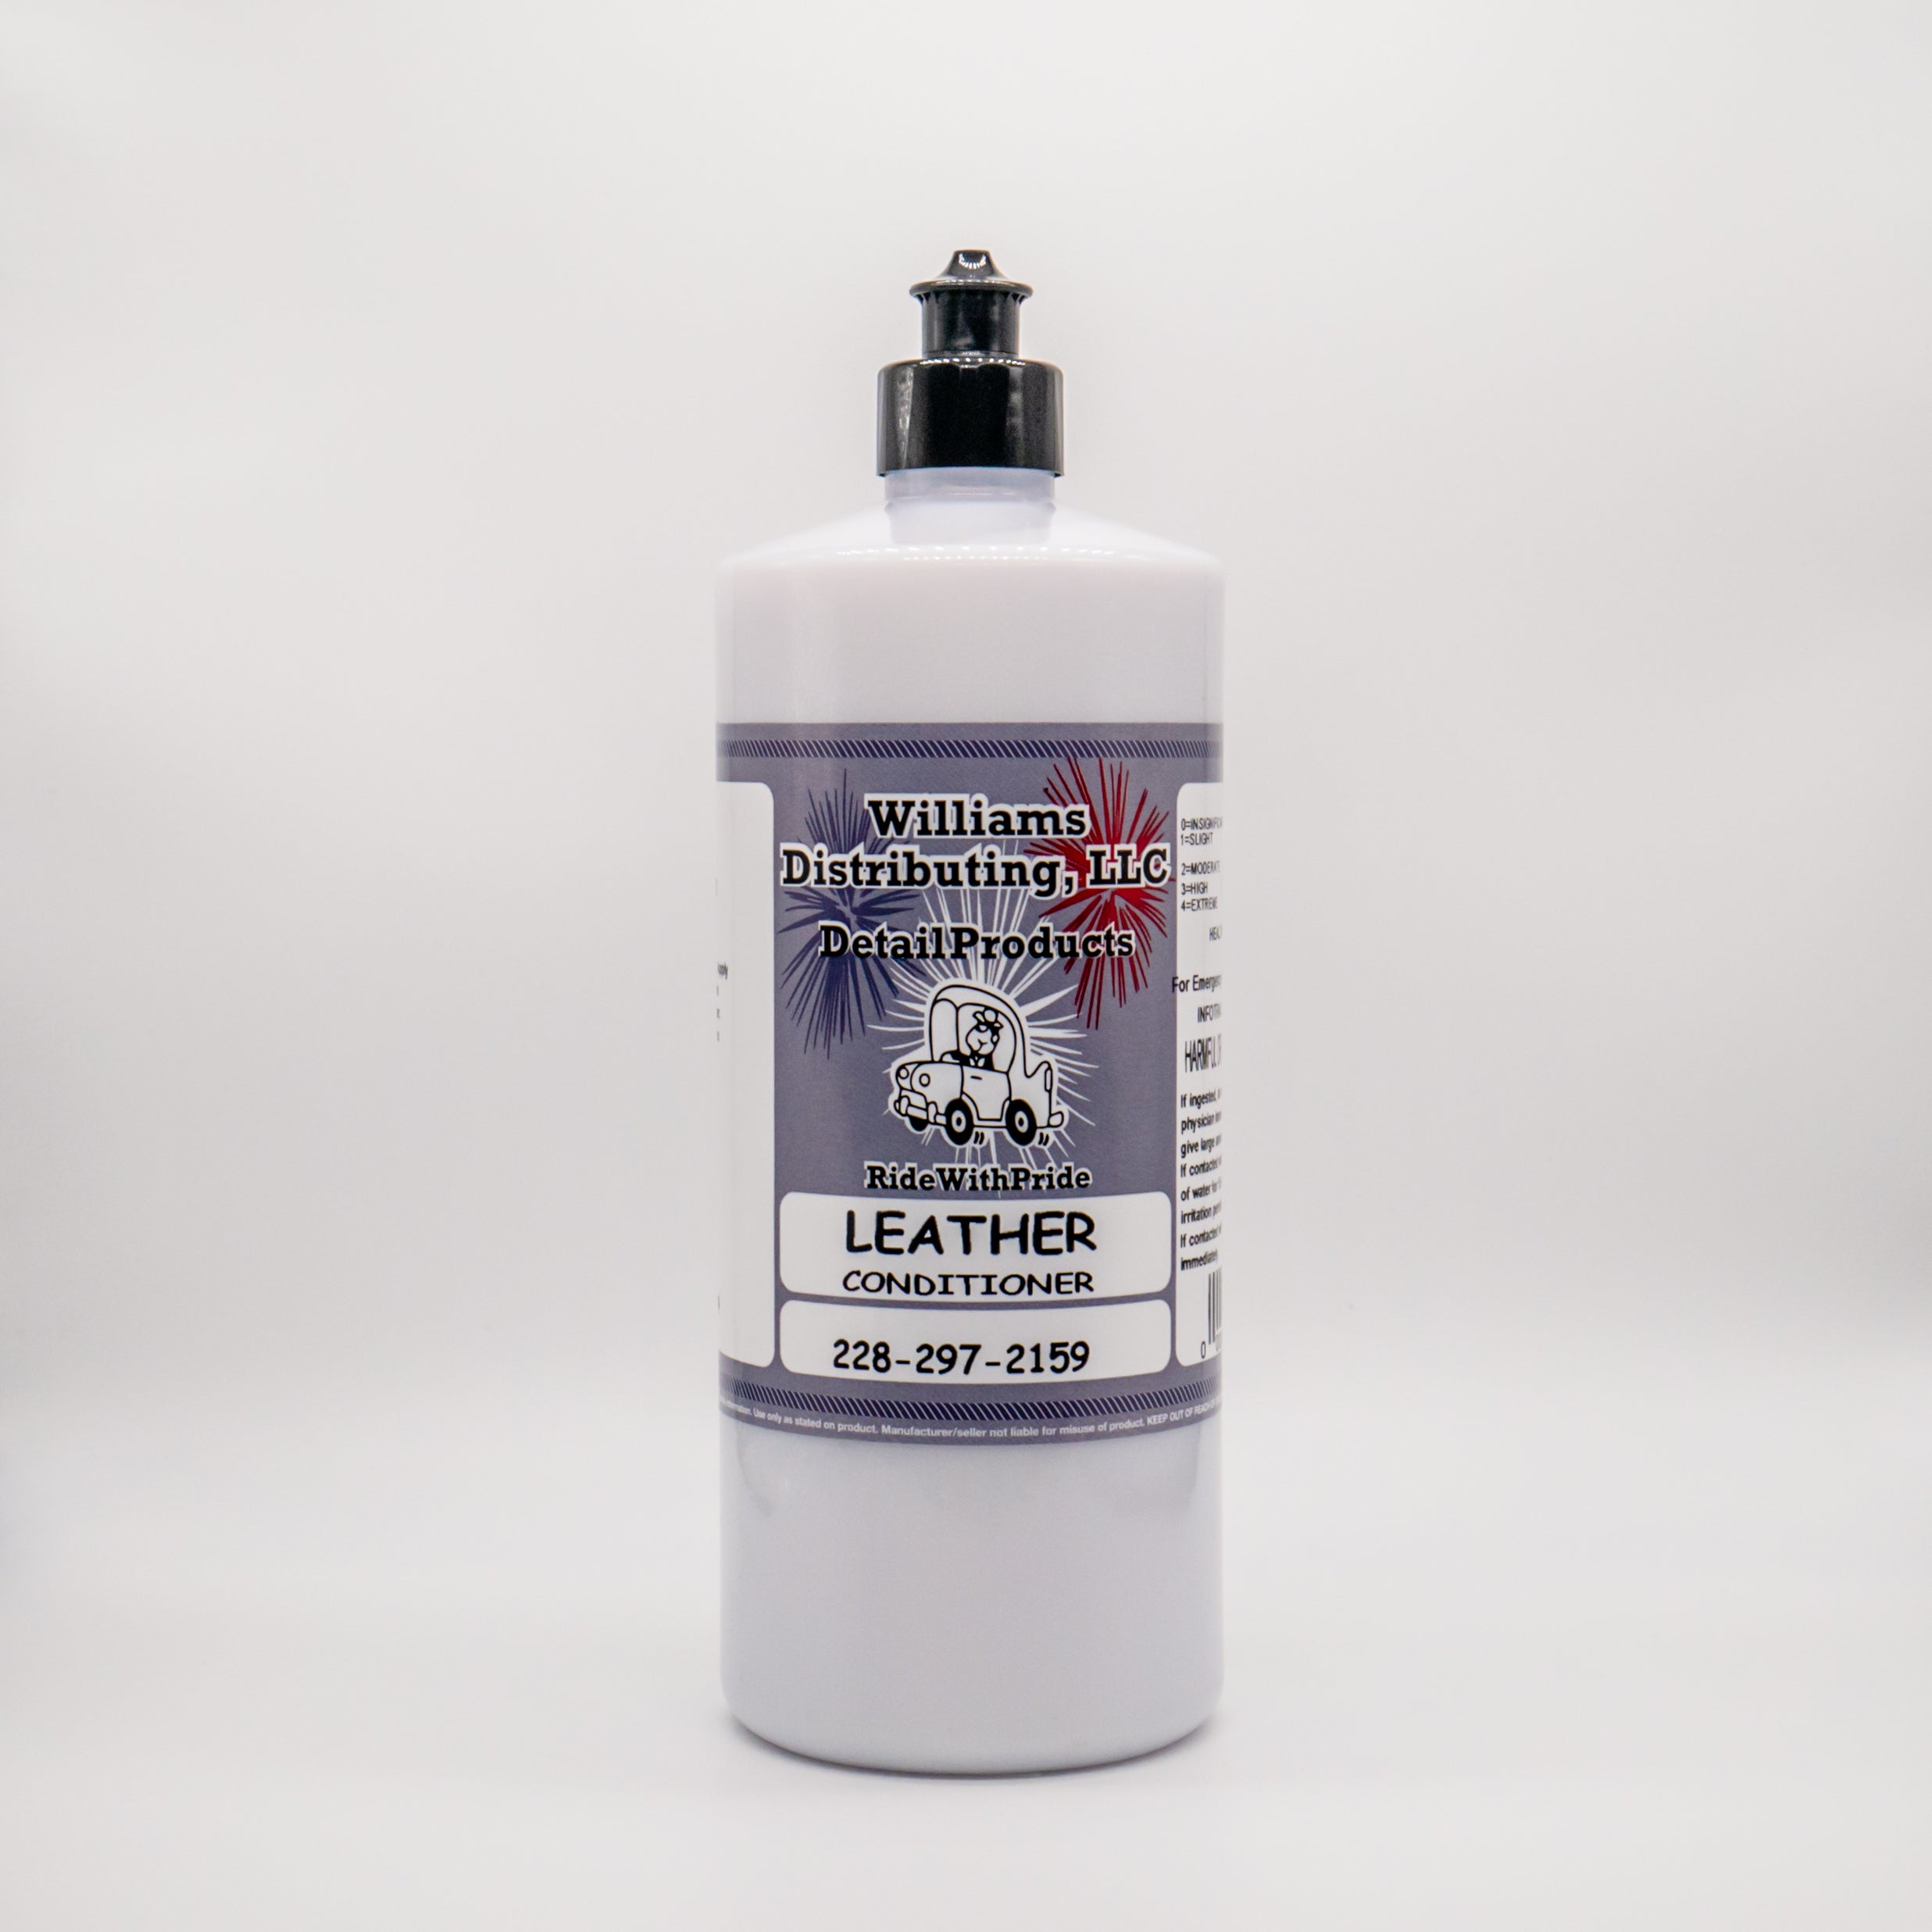 CALIFORNIA CUSTOM Products – Leather Vinyl Conditioner LVC, Protect Your  Leather, Rubber, Plastic and Vinyl from Wearing, Drying & Cracking. No